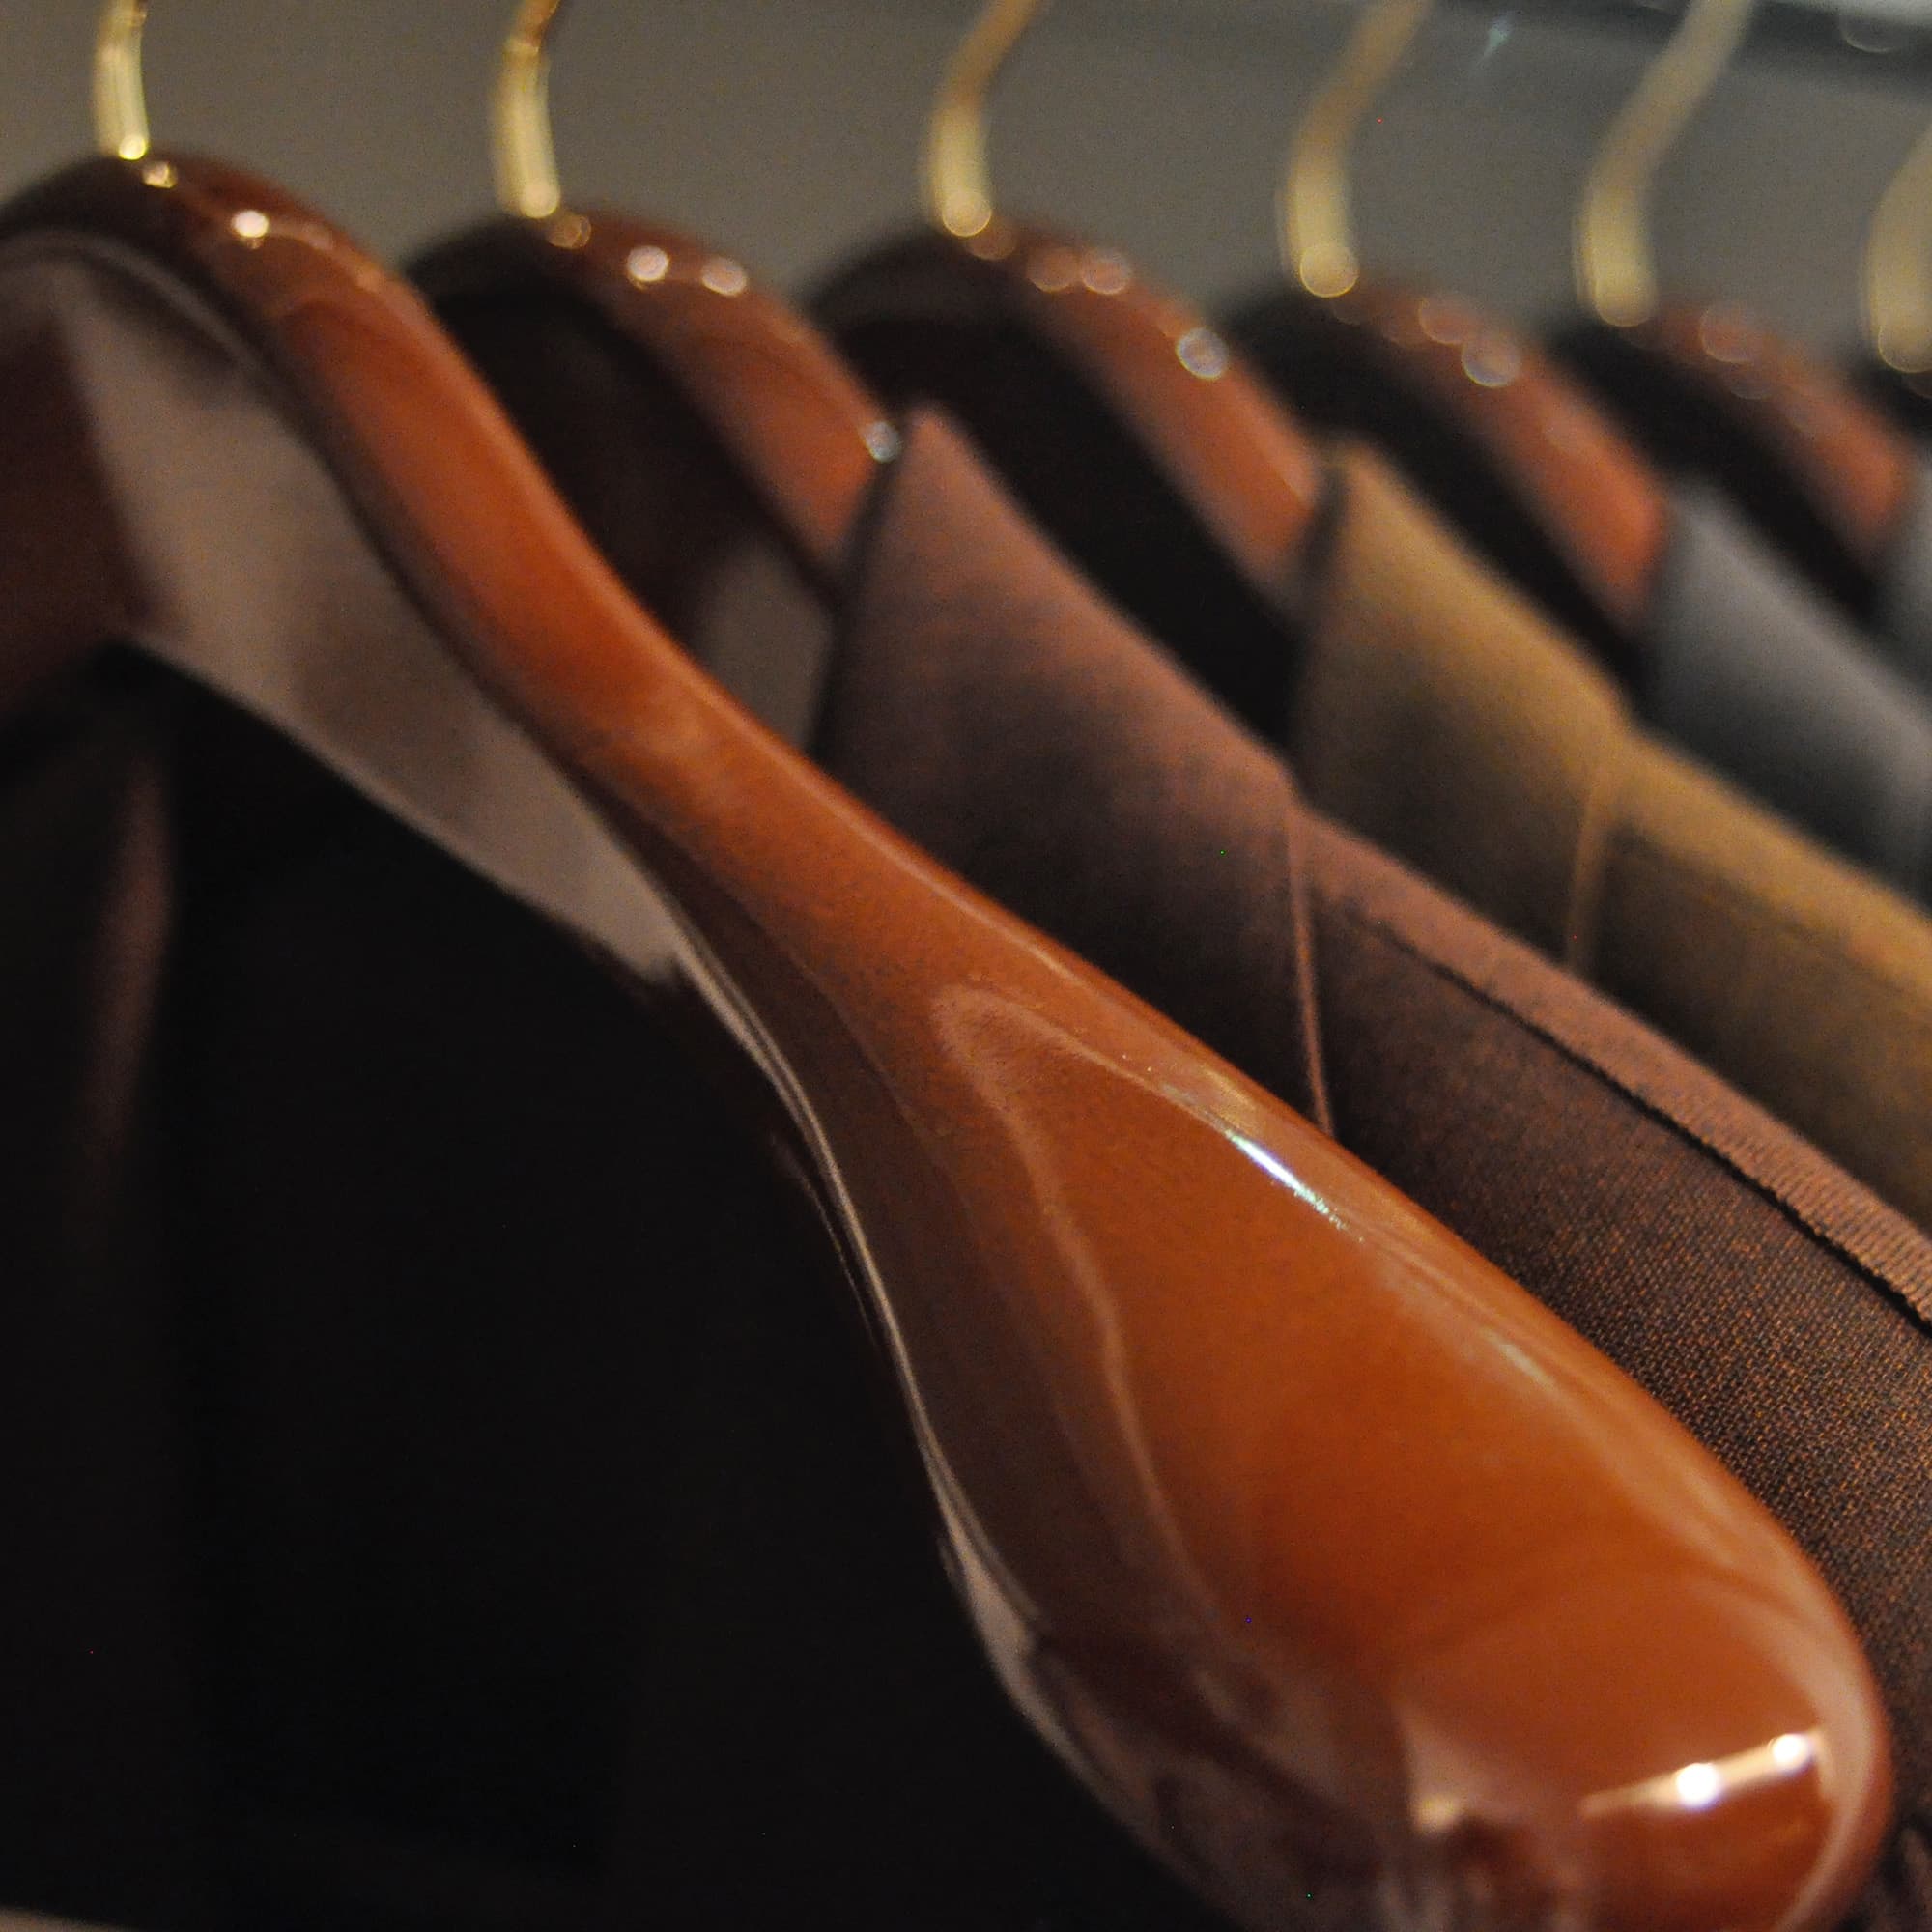 Close up photo of glossy, brown wooden hangers with curved edges, arranged with dark jackets hanging along a bar, facing the viewer.